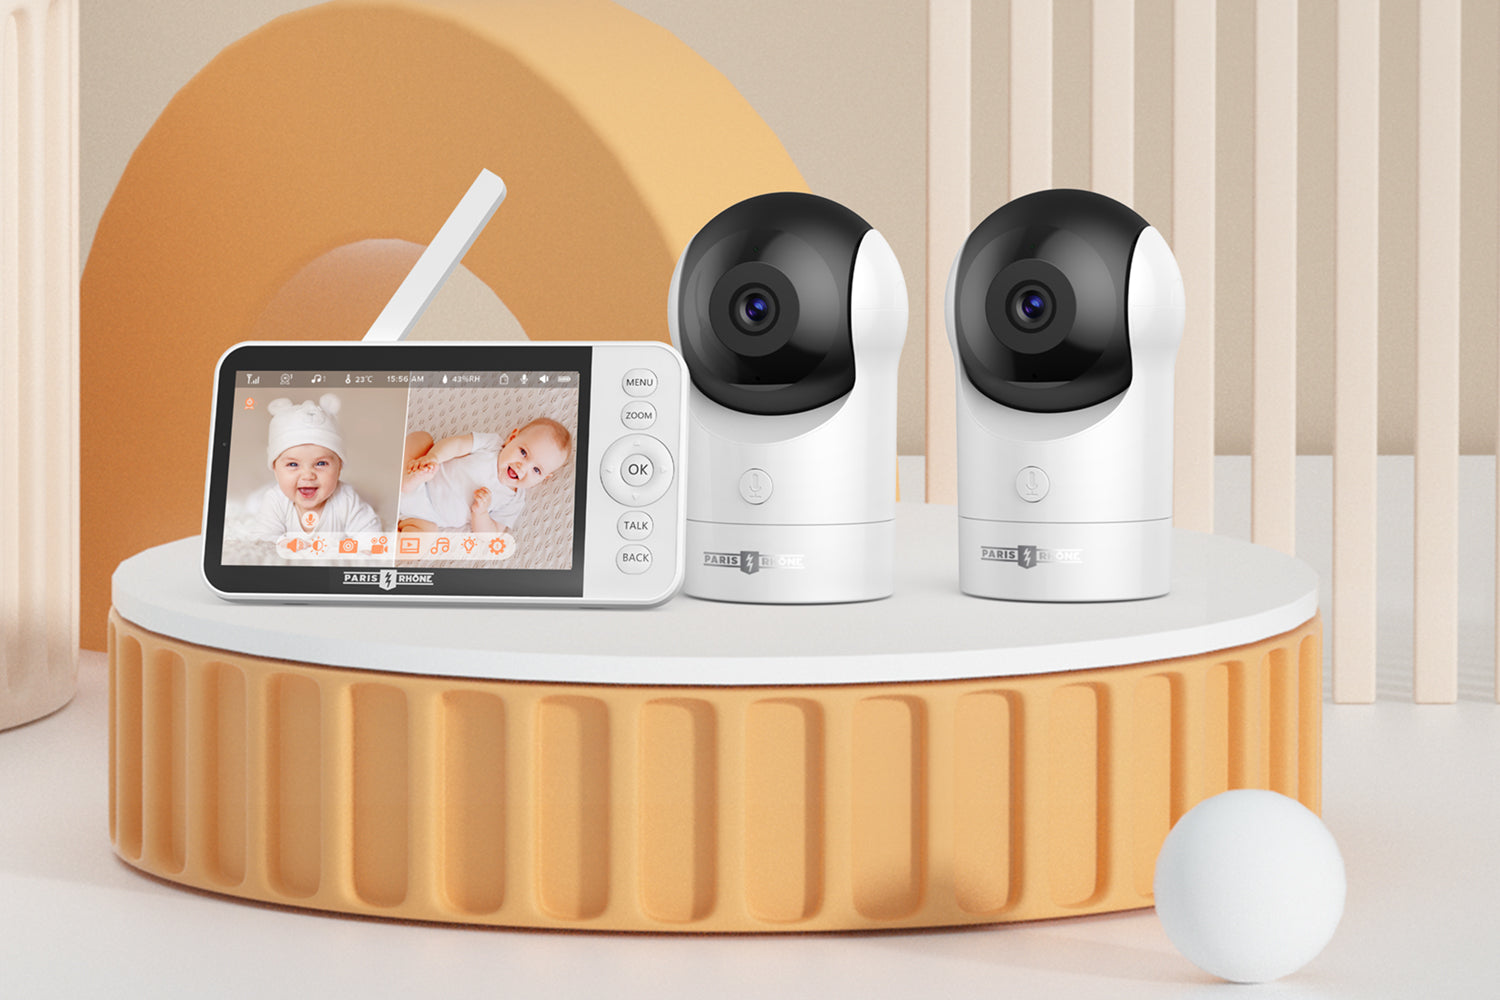 Discount Pre-Orders on a Top of the Range Baby Monitor